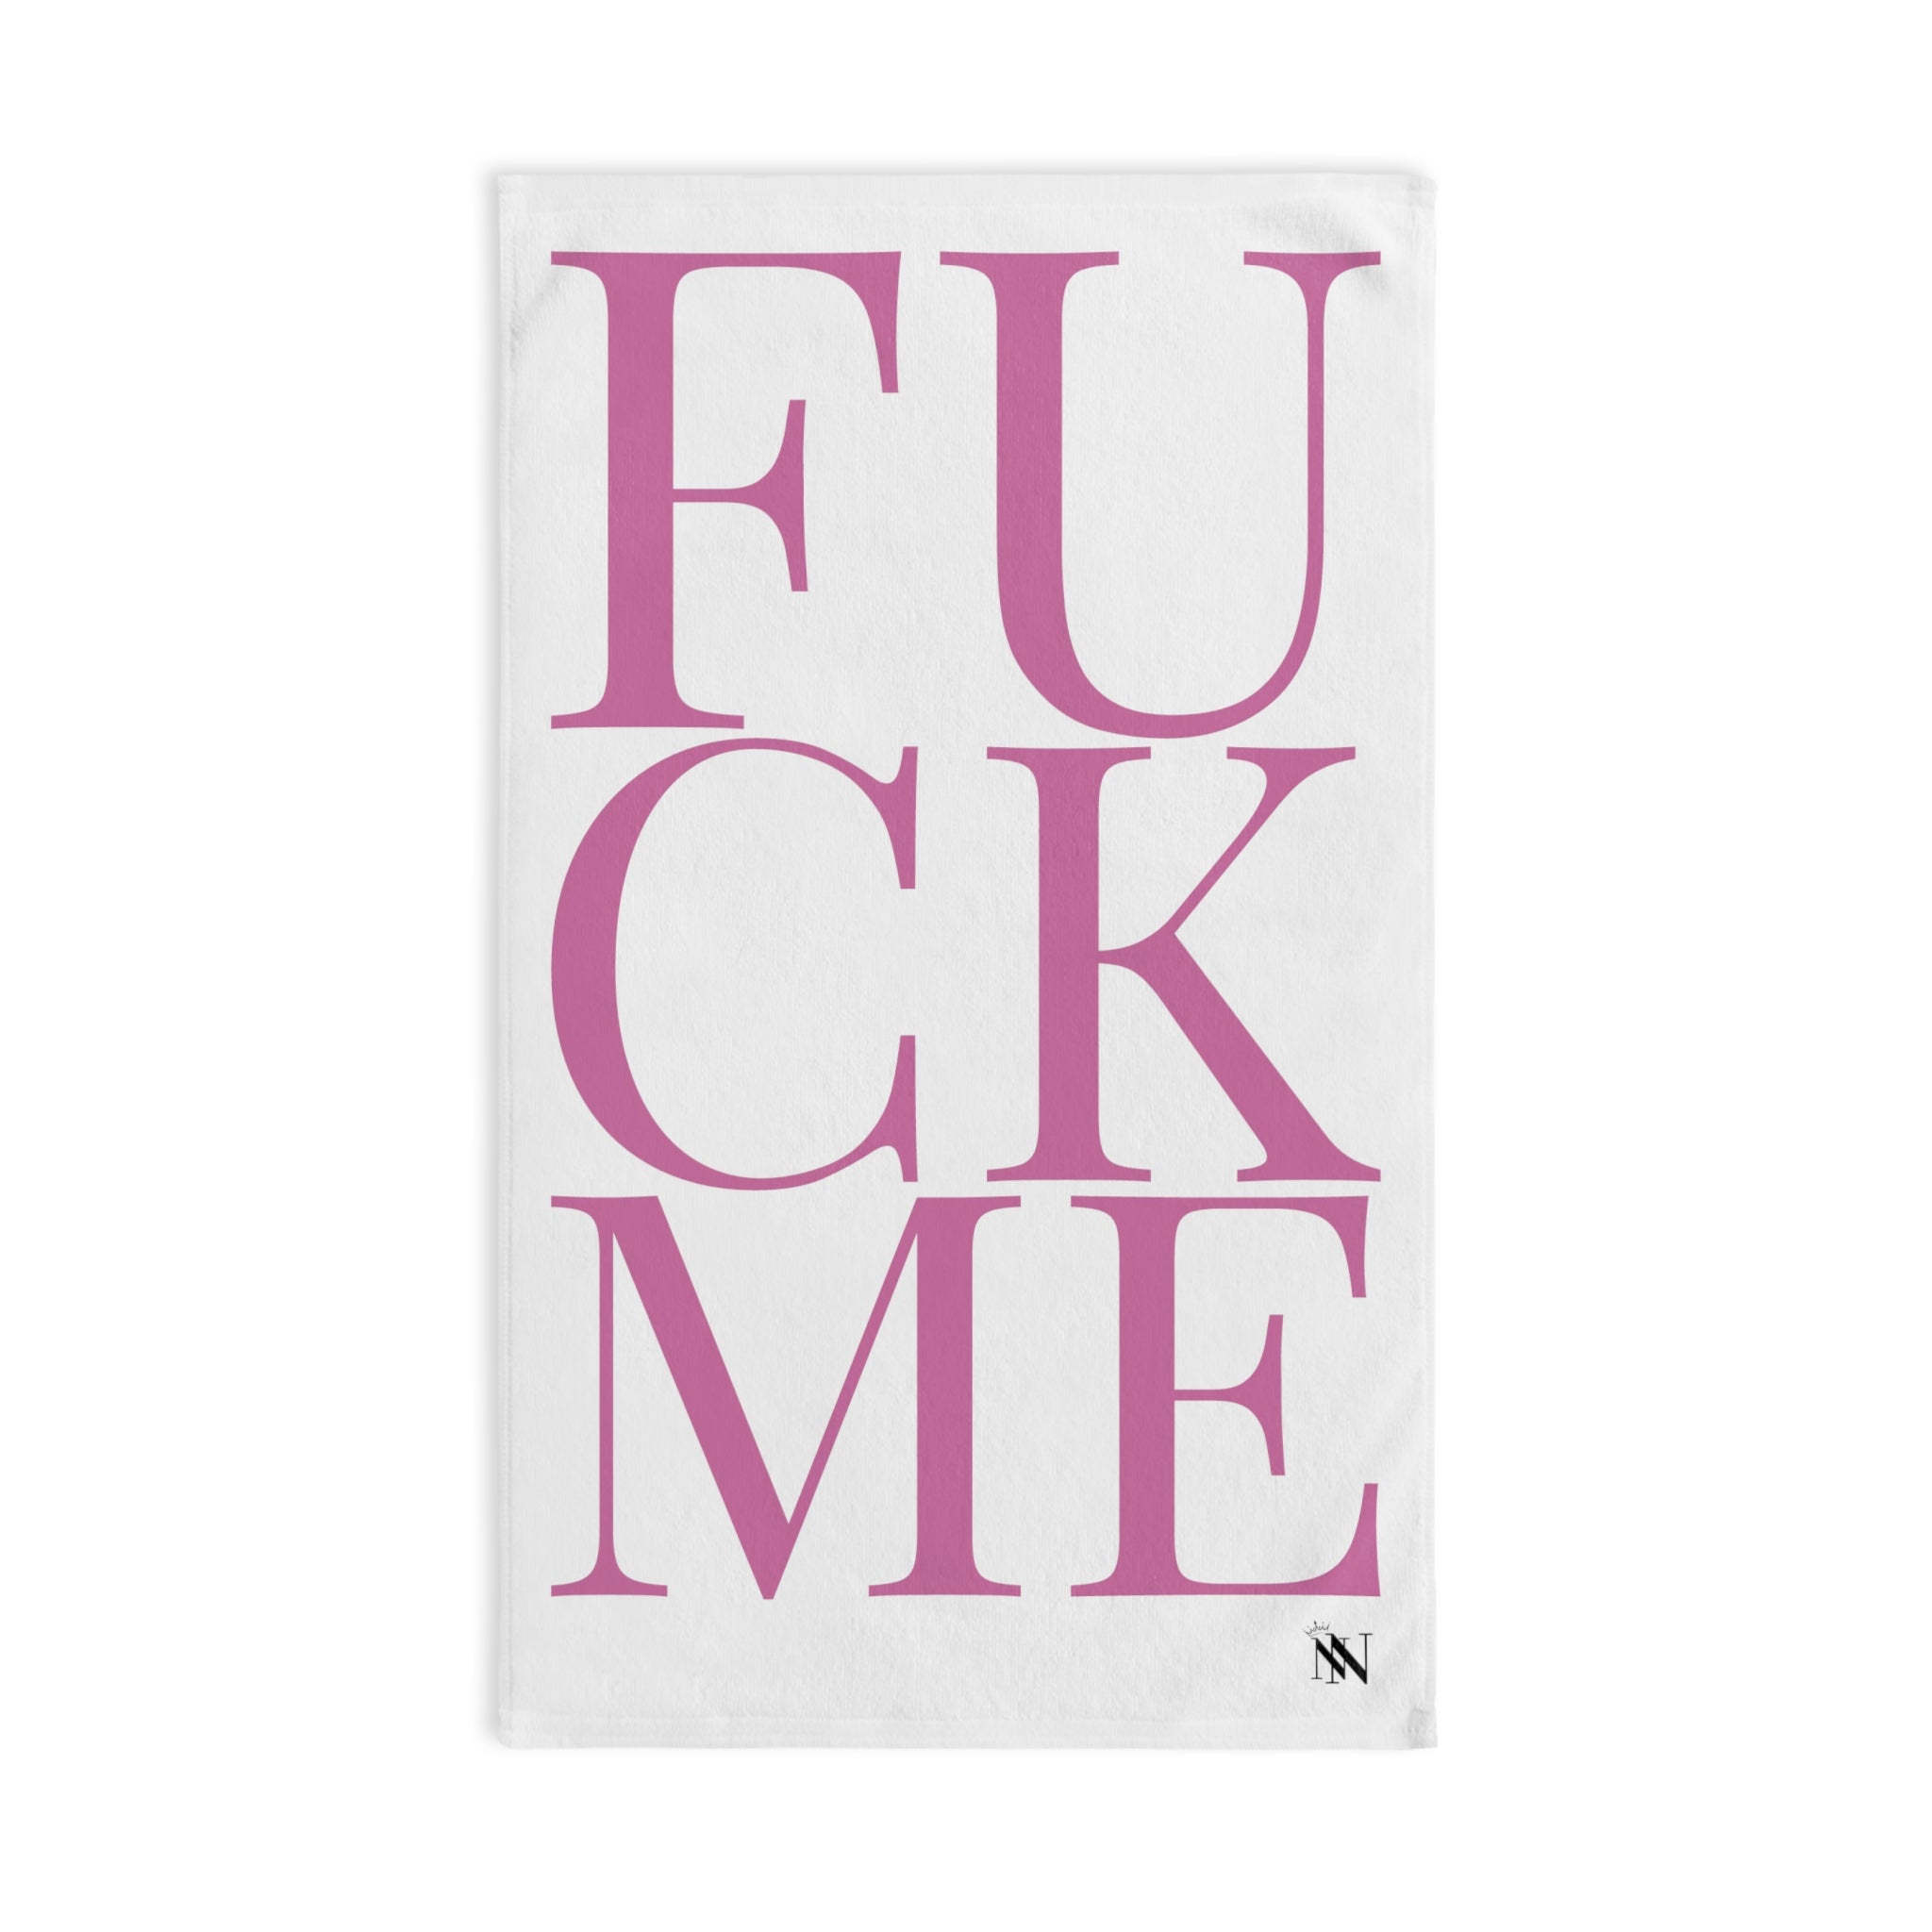 F*ck Me Pink White | Funny Gifts for Men - Gifts for Him - Birthday Gifts for Men, Him, Her, Husband, Boyfriend, Girlfriend, New Couple Gifts, Fathers & Valentines Day Gifts, Christmas Gifts NECTAR NAPKINS